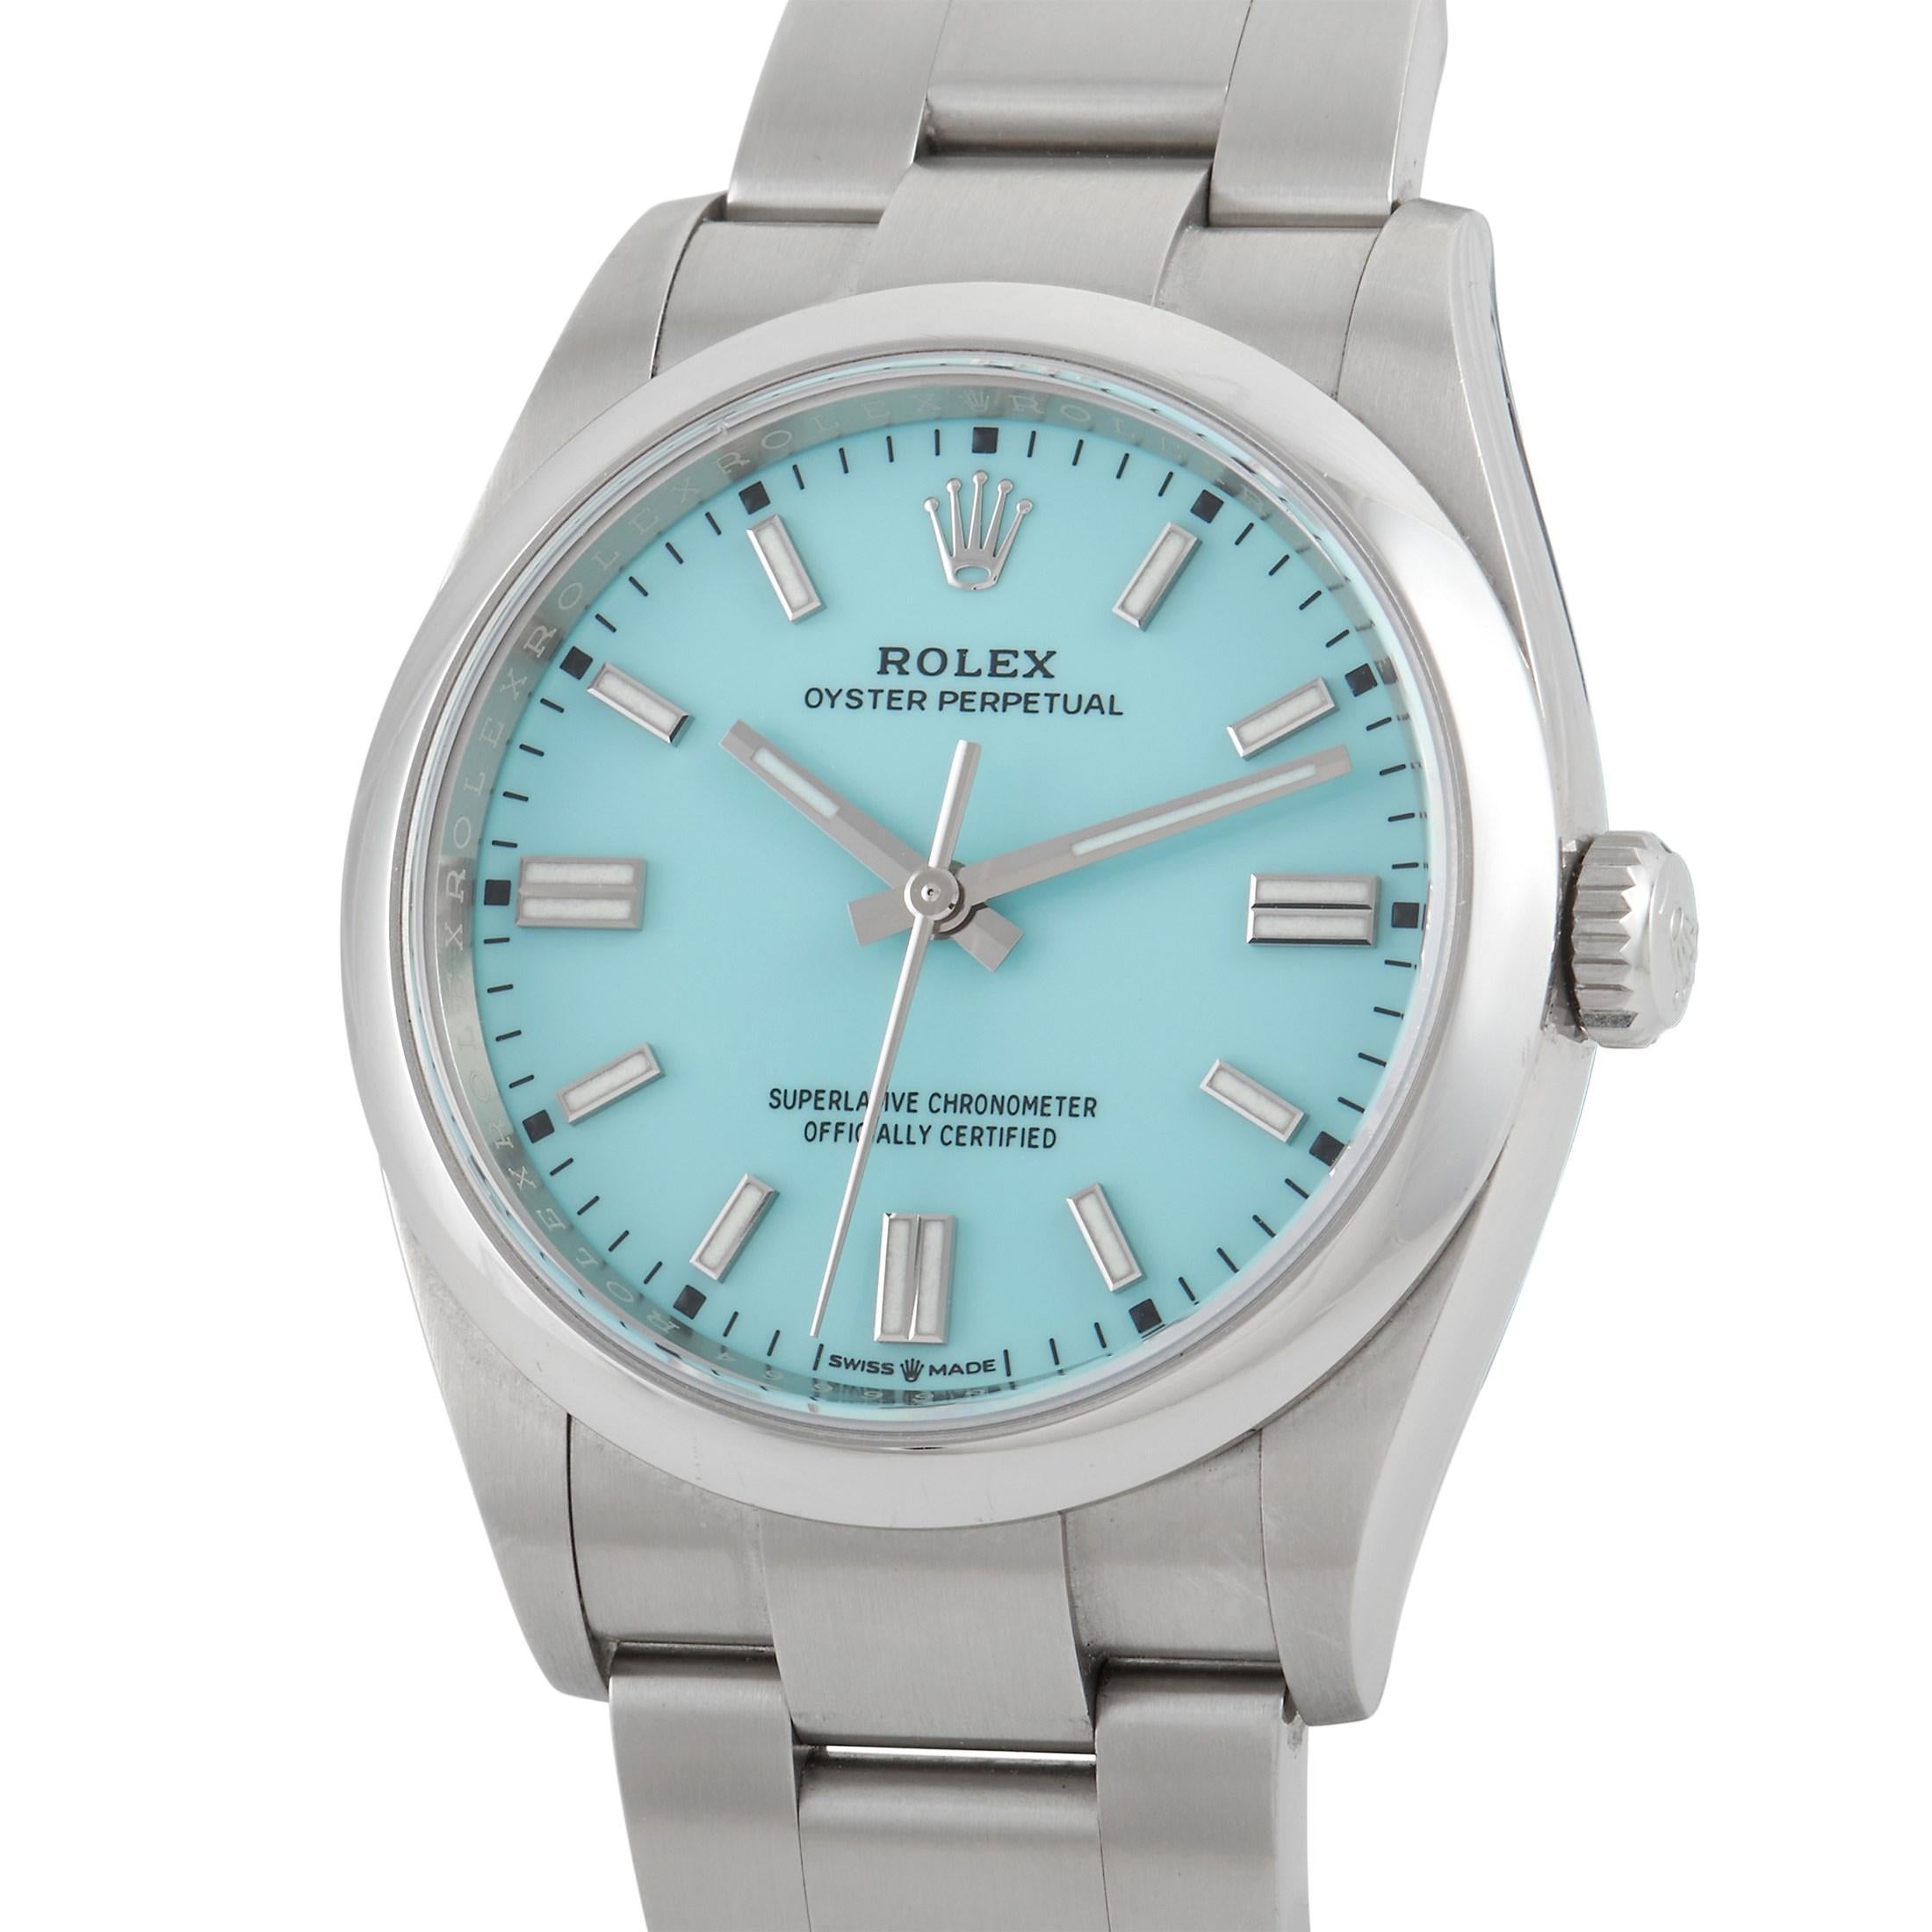 The Rolex Oyster Perpetual Watch, reference number 126000, perfectly pairs luxury with a bold pop of color. 

This watch’s 36mm case and bracelet are both crafted from opulent Oystersteel. Minimalist details like simple luminous index markers and